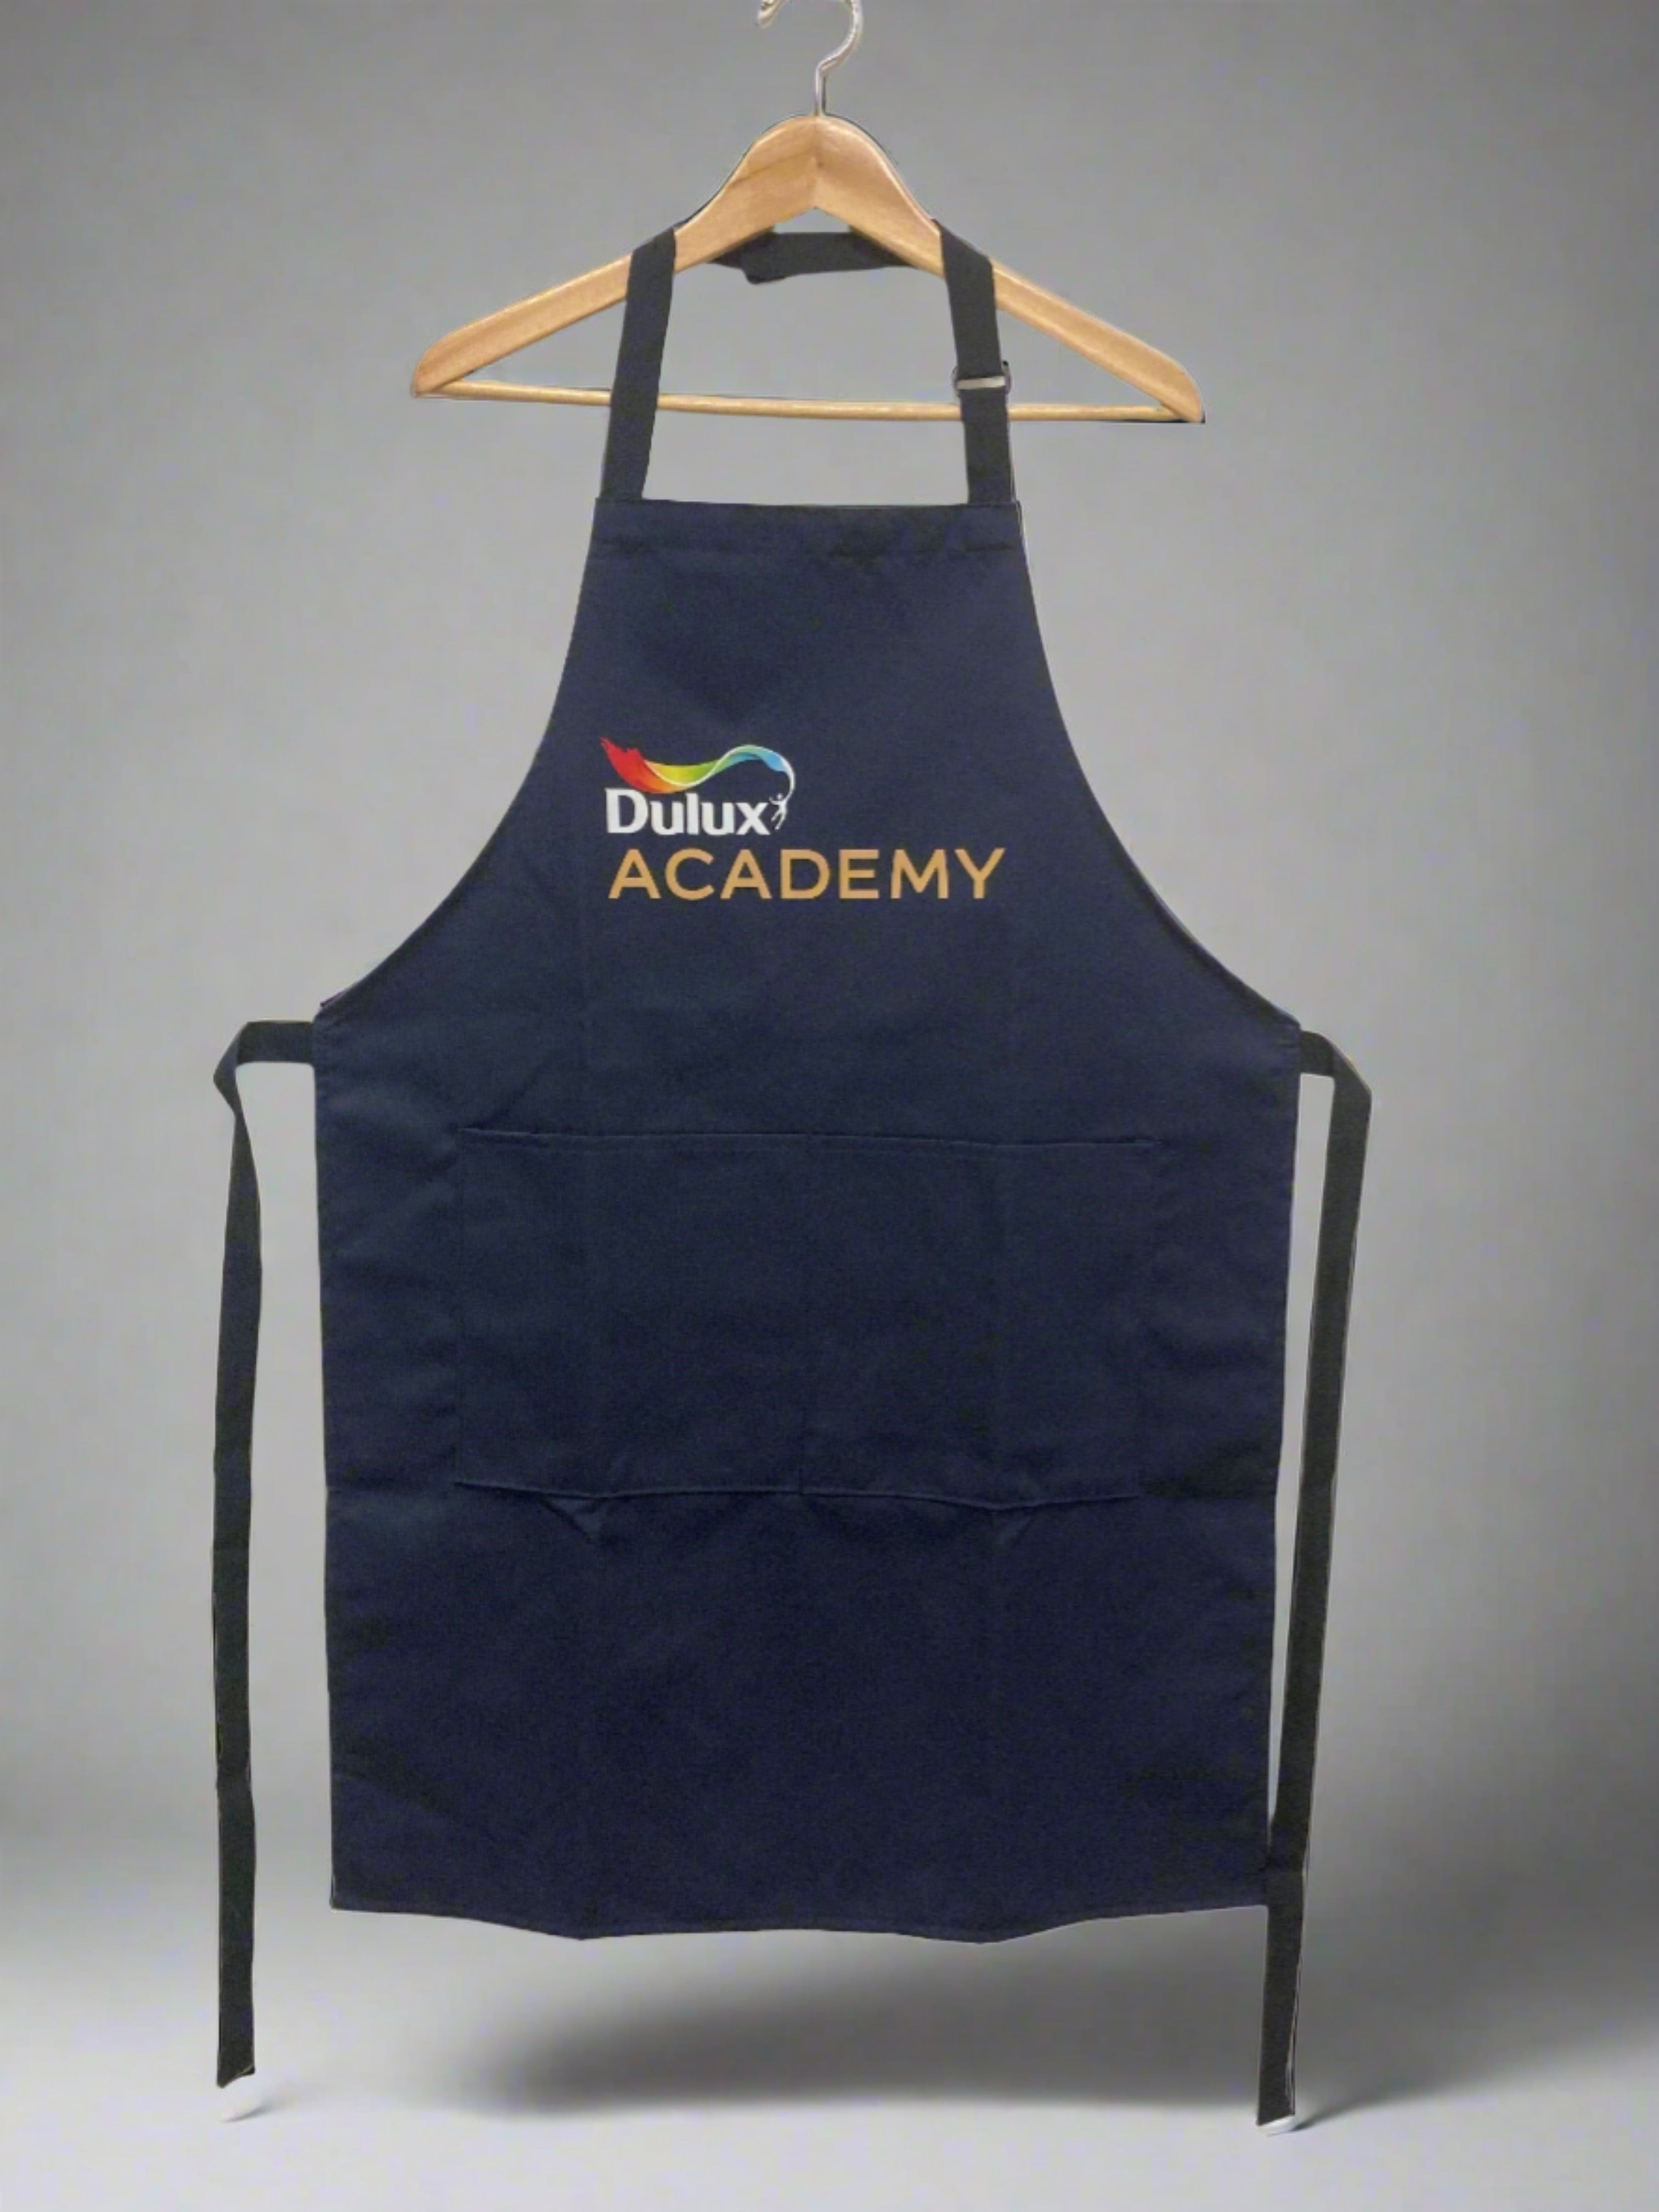 Dulux Academy branded Systainer – dulux-academy